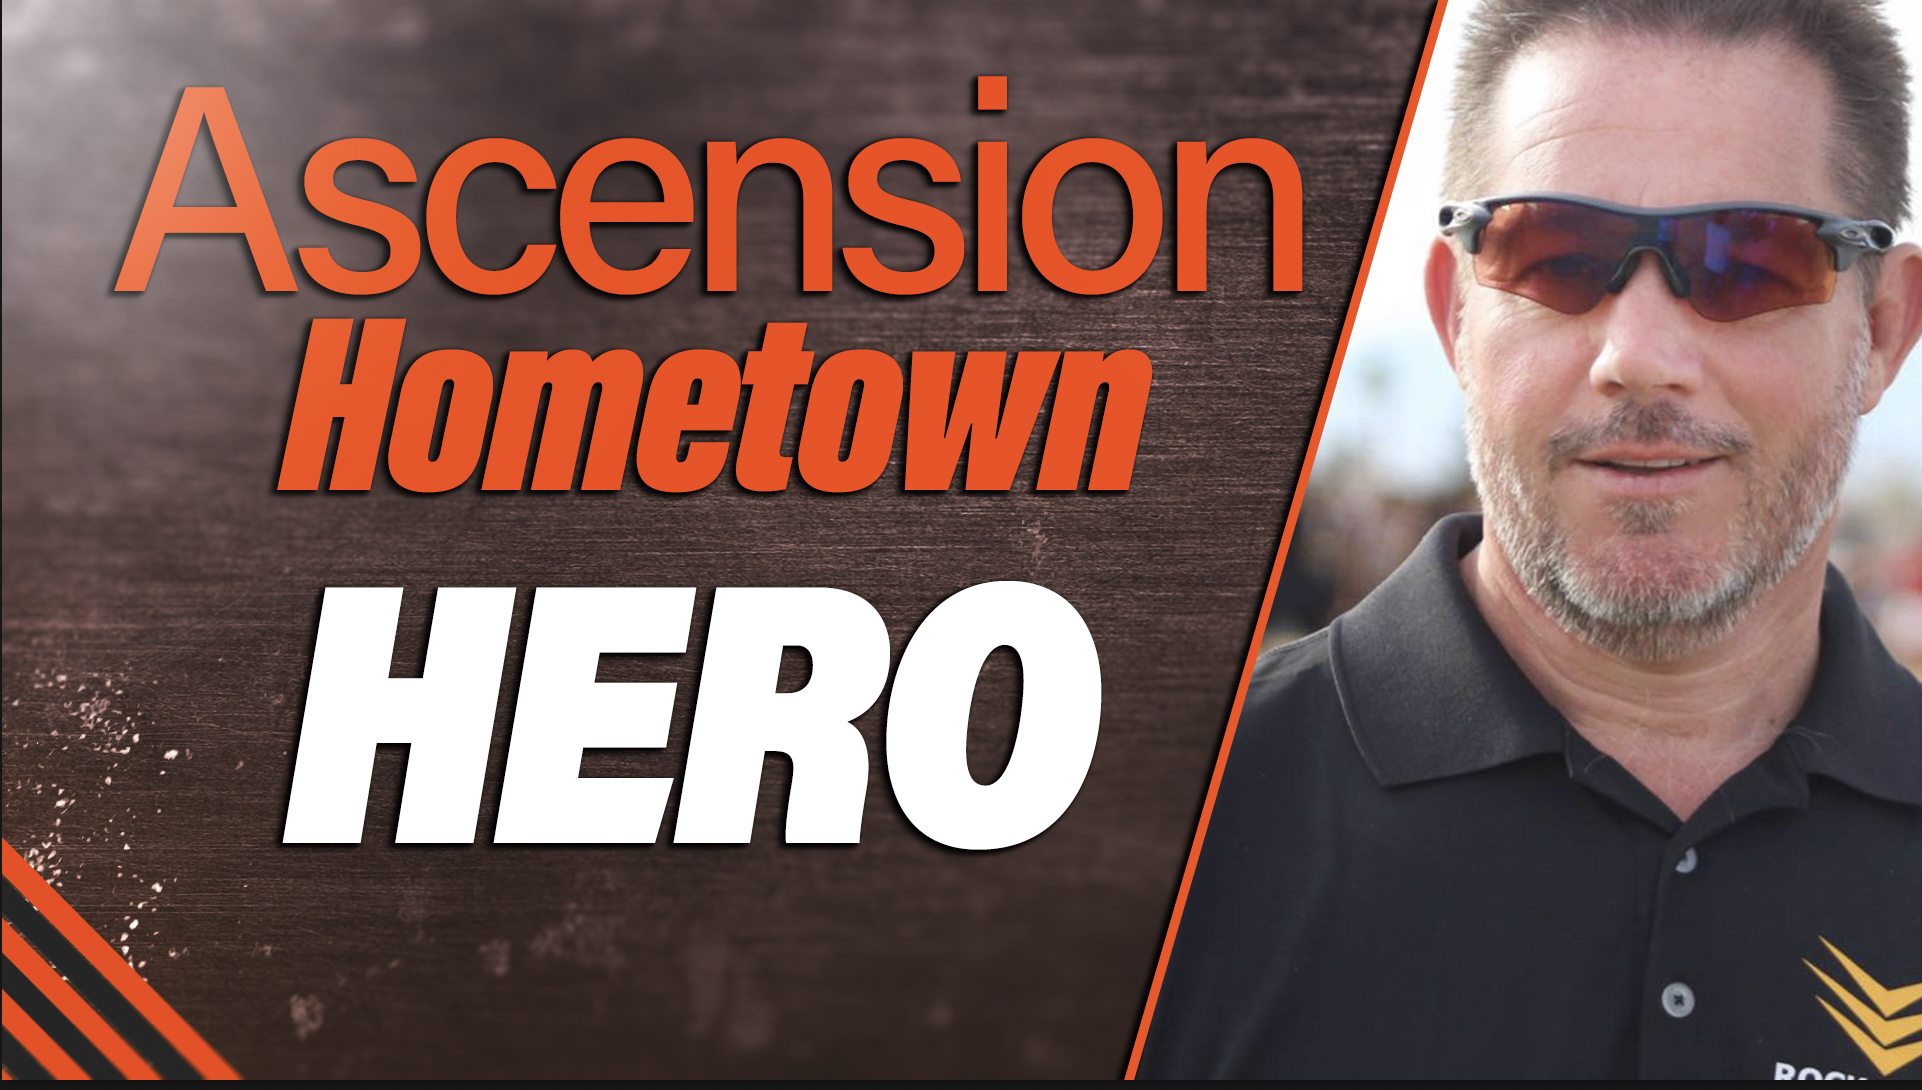 Ascension Seton Hometown Hero: Todd Knight, Rock Rugby